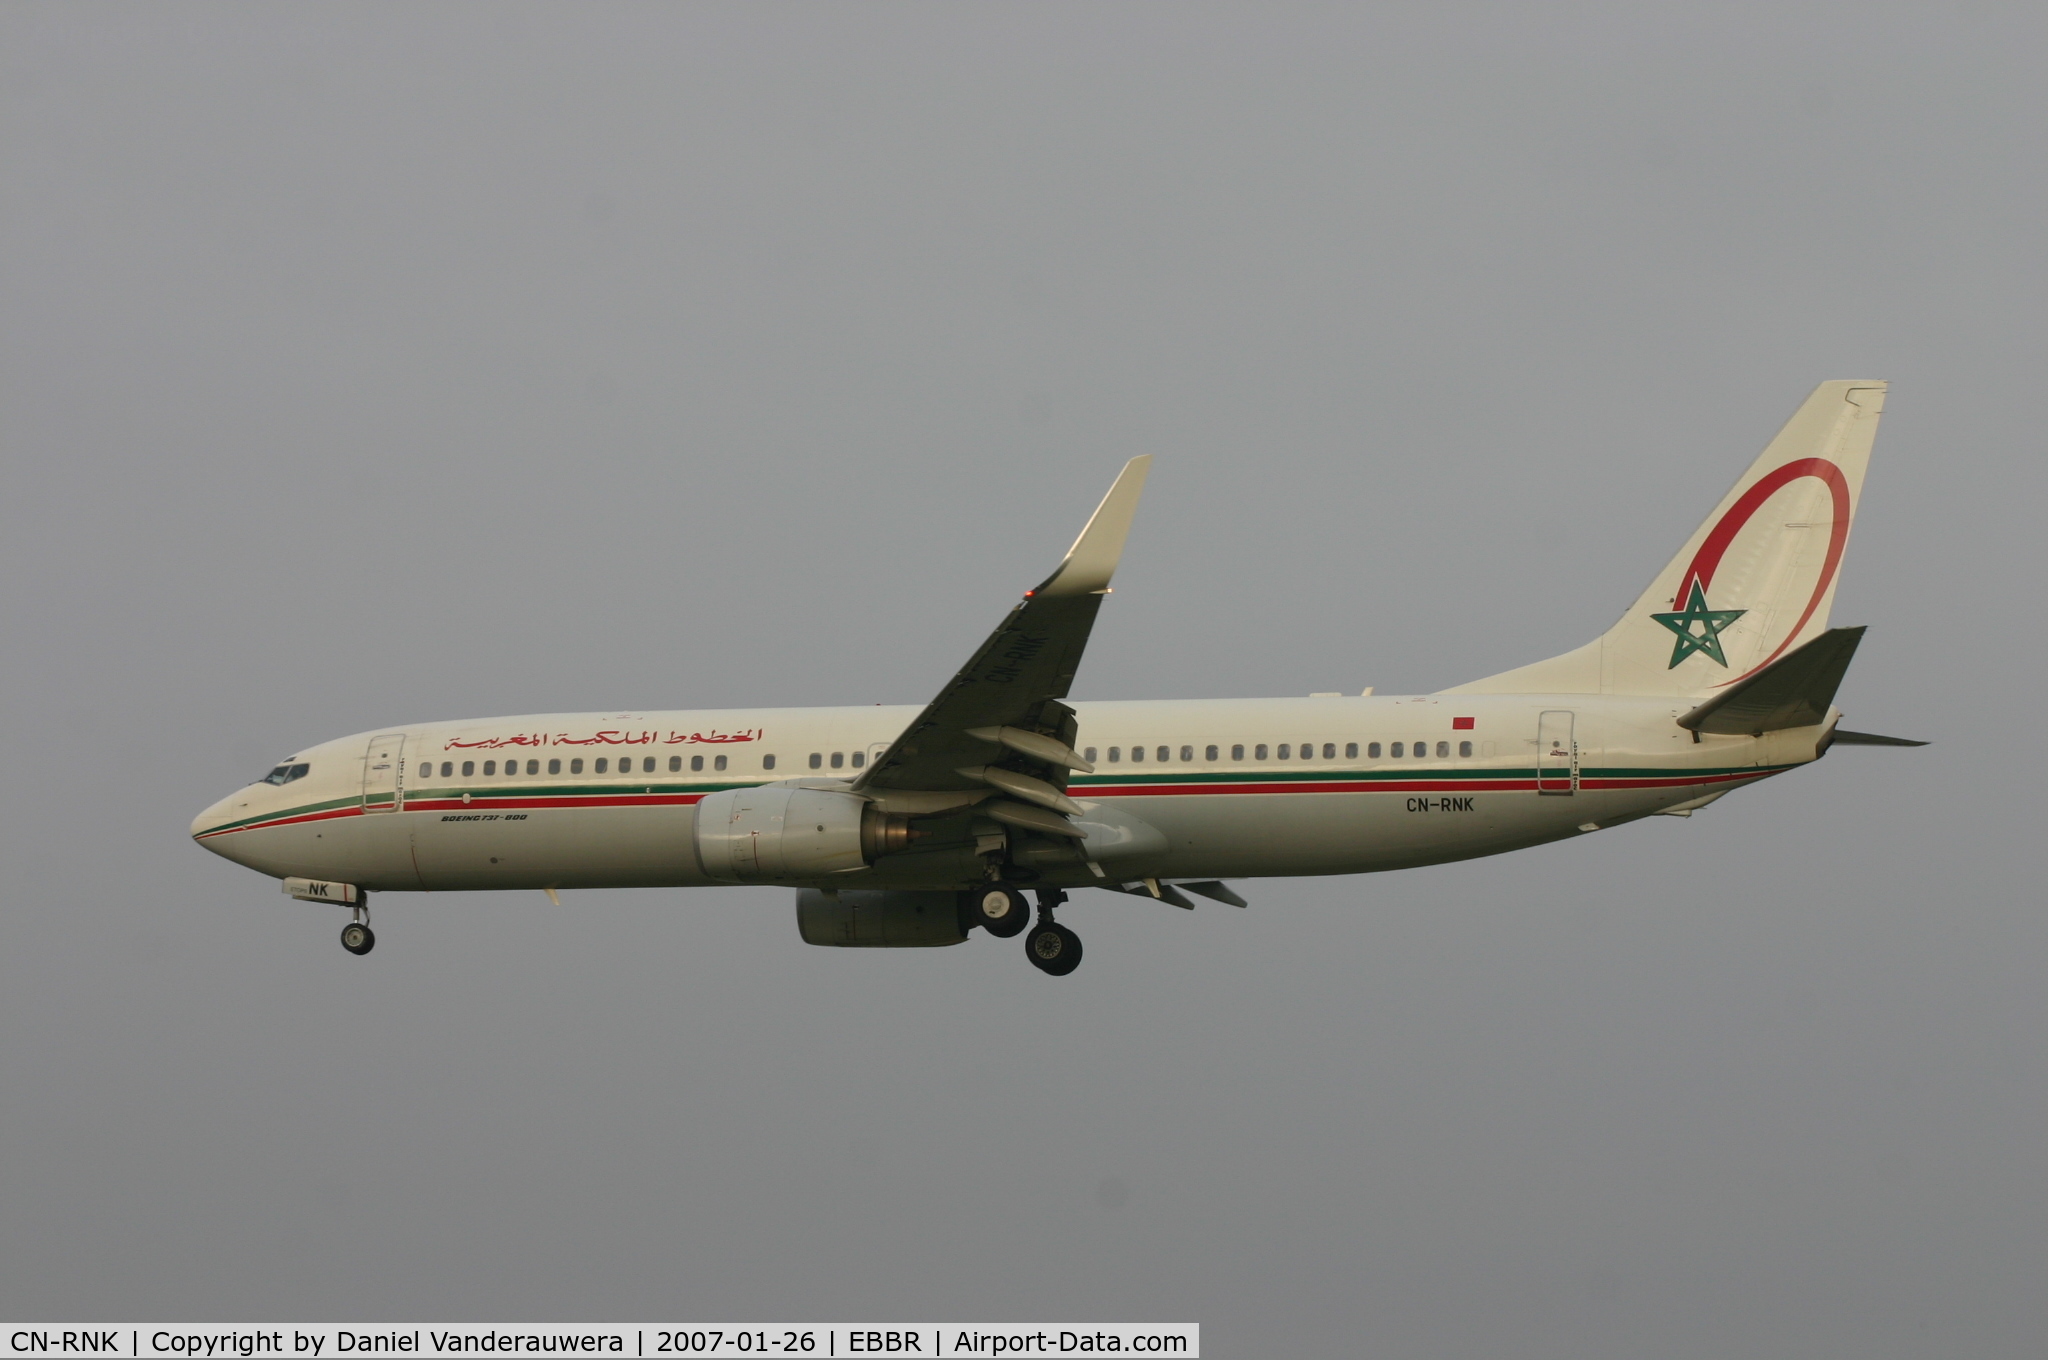 CN-RNK, 1998 Boeing 737-8B6 C/N 28981, arrival of flight AT838 from Casablanca